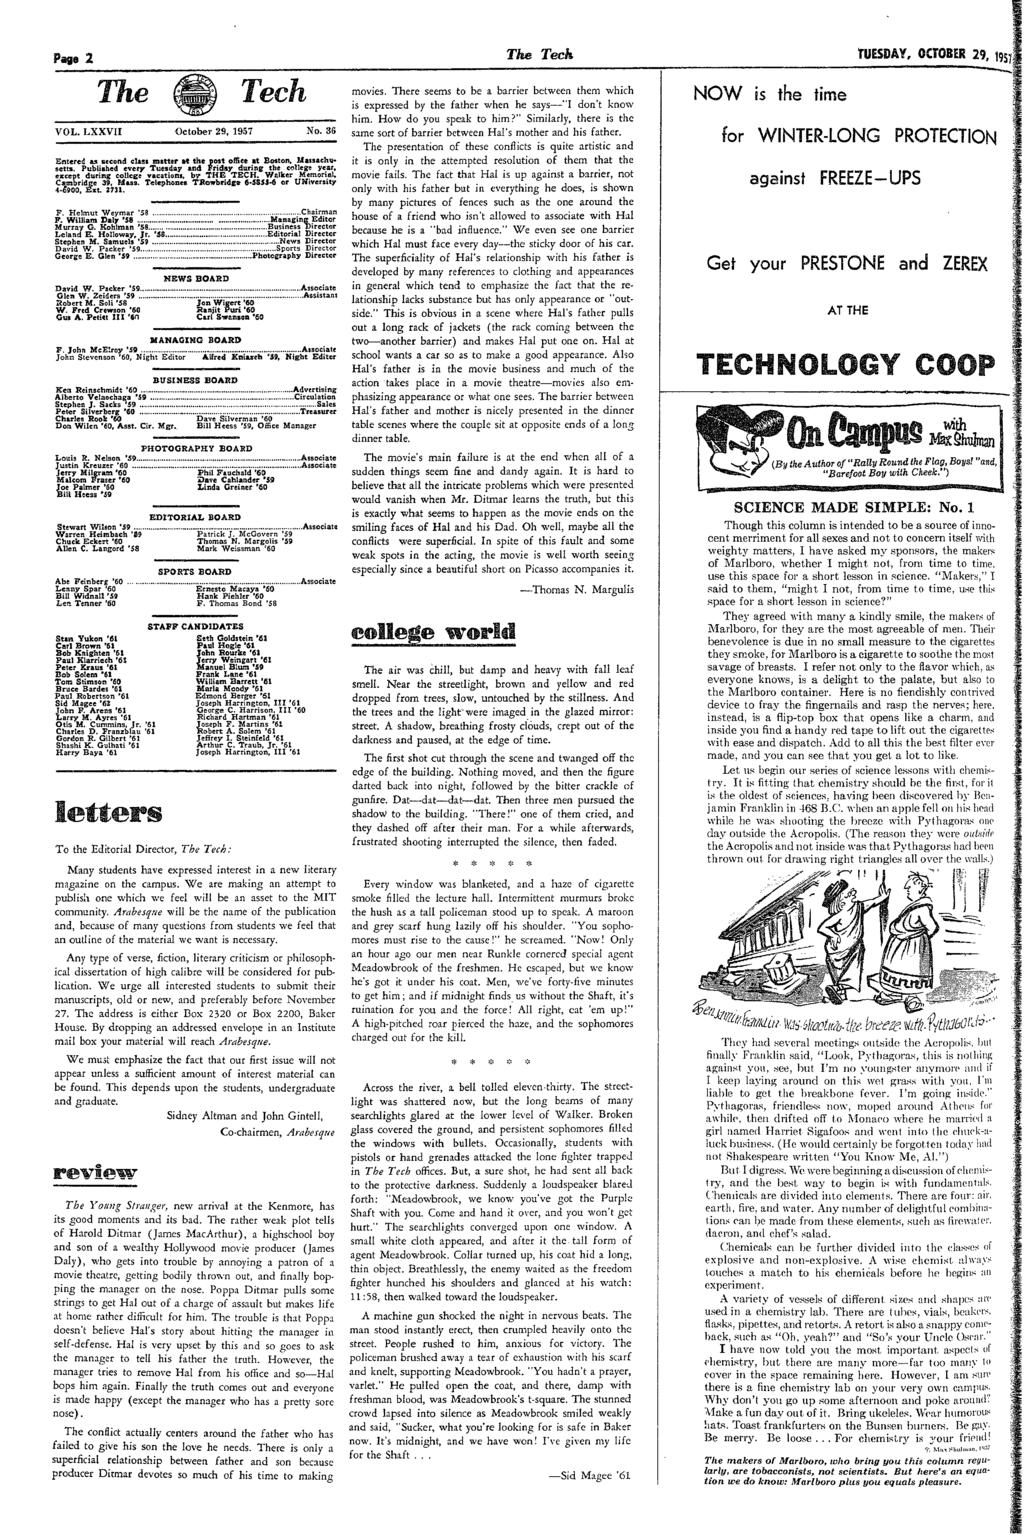 Page 2 T e e -- VOL. LXXV October 29, 1957 No. 3G ntered as second class matter at the post offce at Boston, Massachusetts.